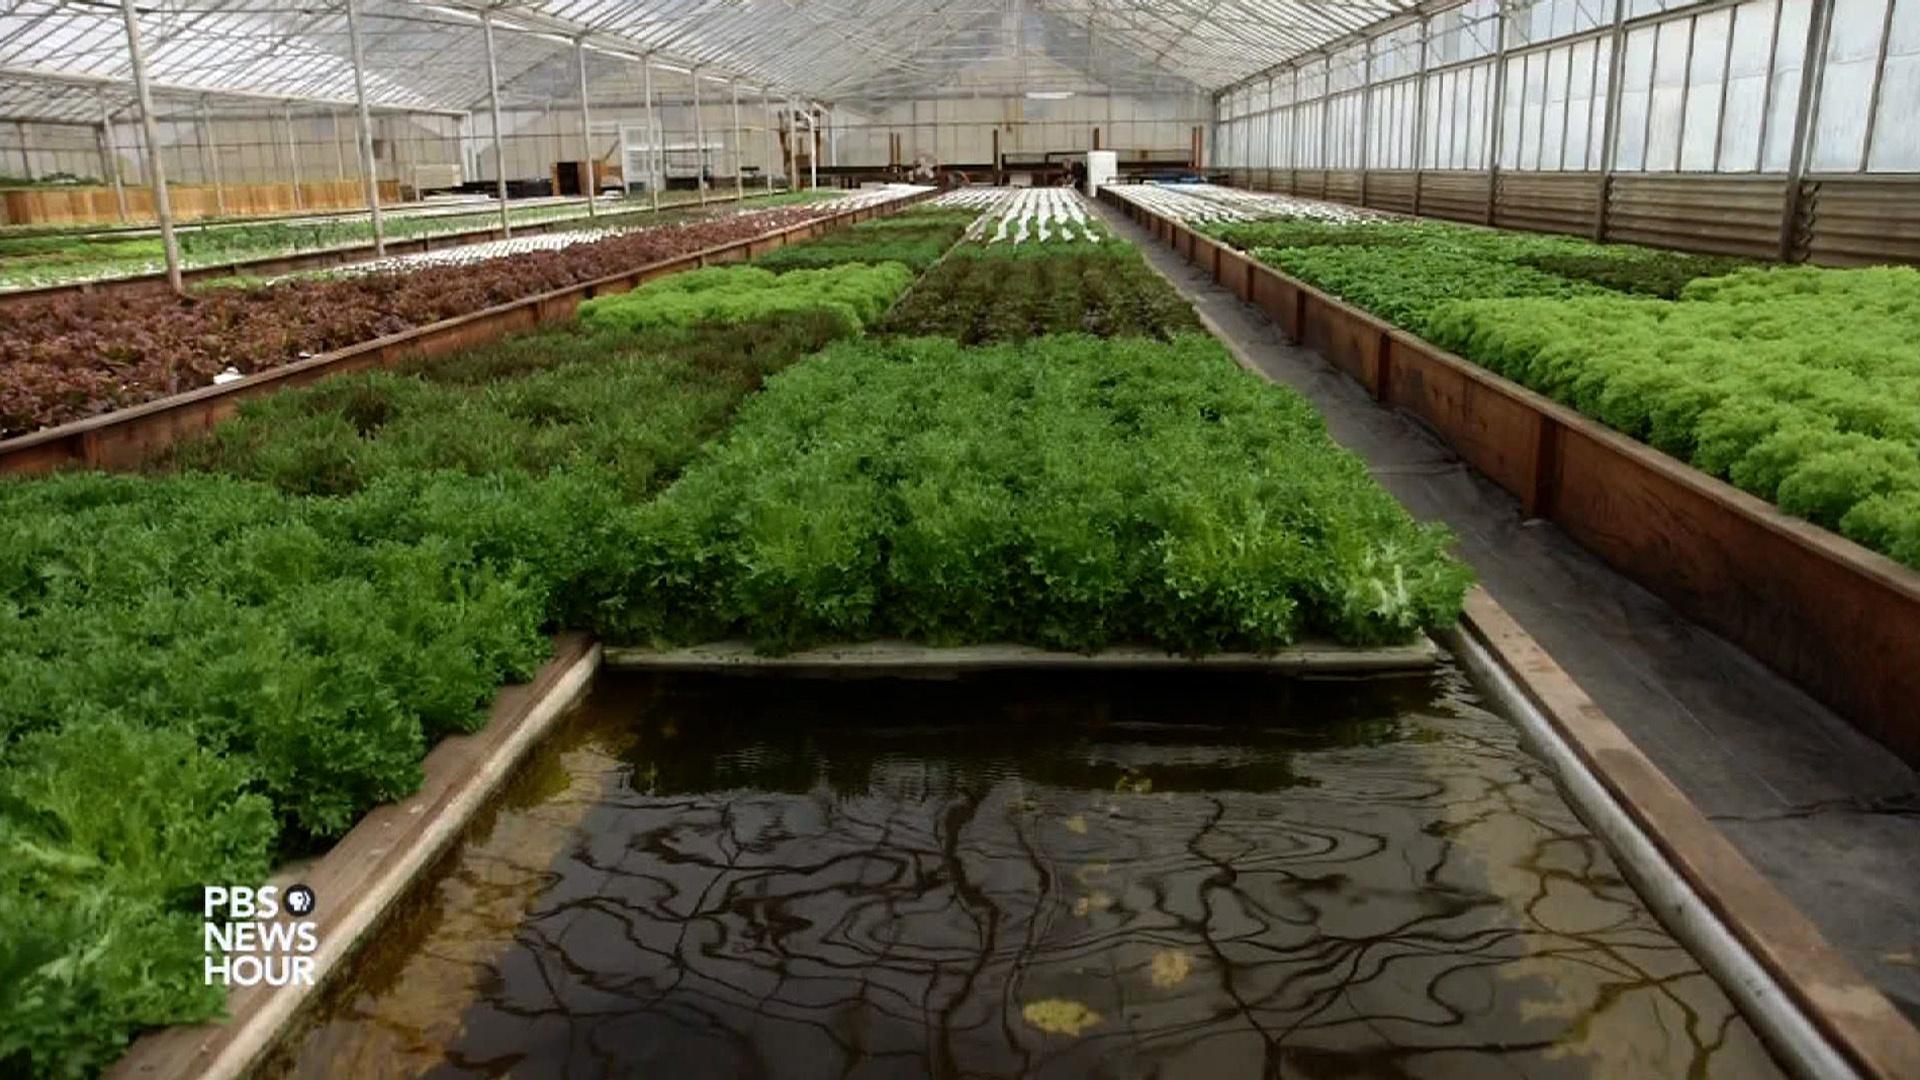 PBS NewsHour Aquaponic farming saves water, but can it